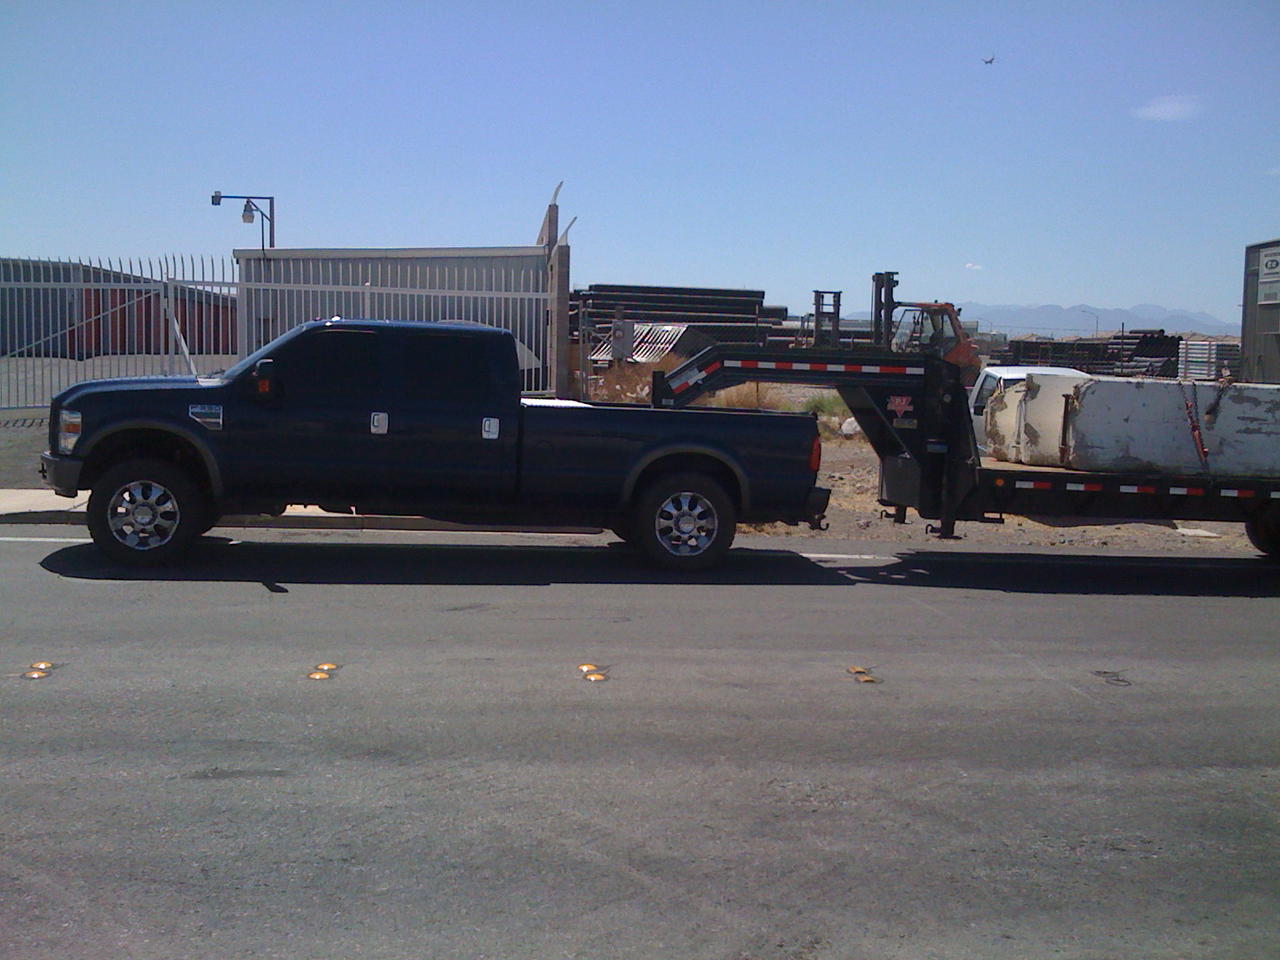 F350 SRW Towing Capacities - Page 2 - Ford Truck Enthusiasts Forums A Truck Pulled A Car Of 2 350 Kg